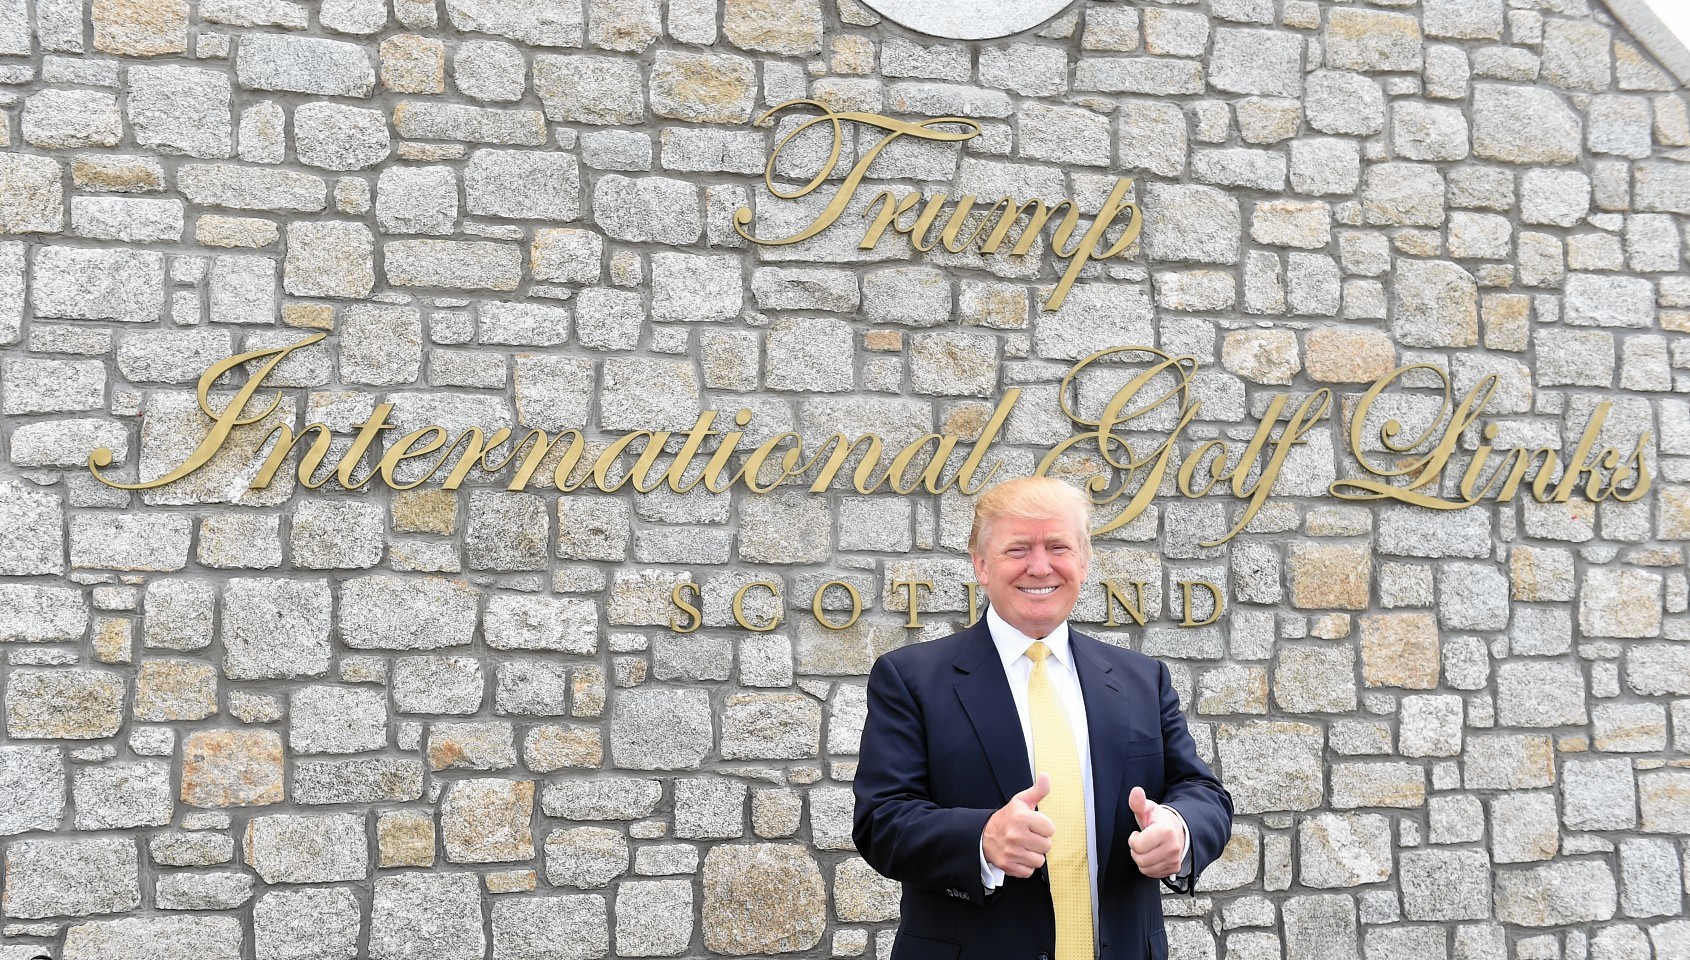 Donald Trump at the opening of the clubhouse